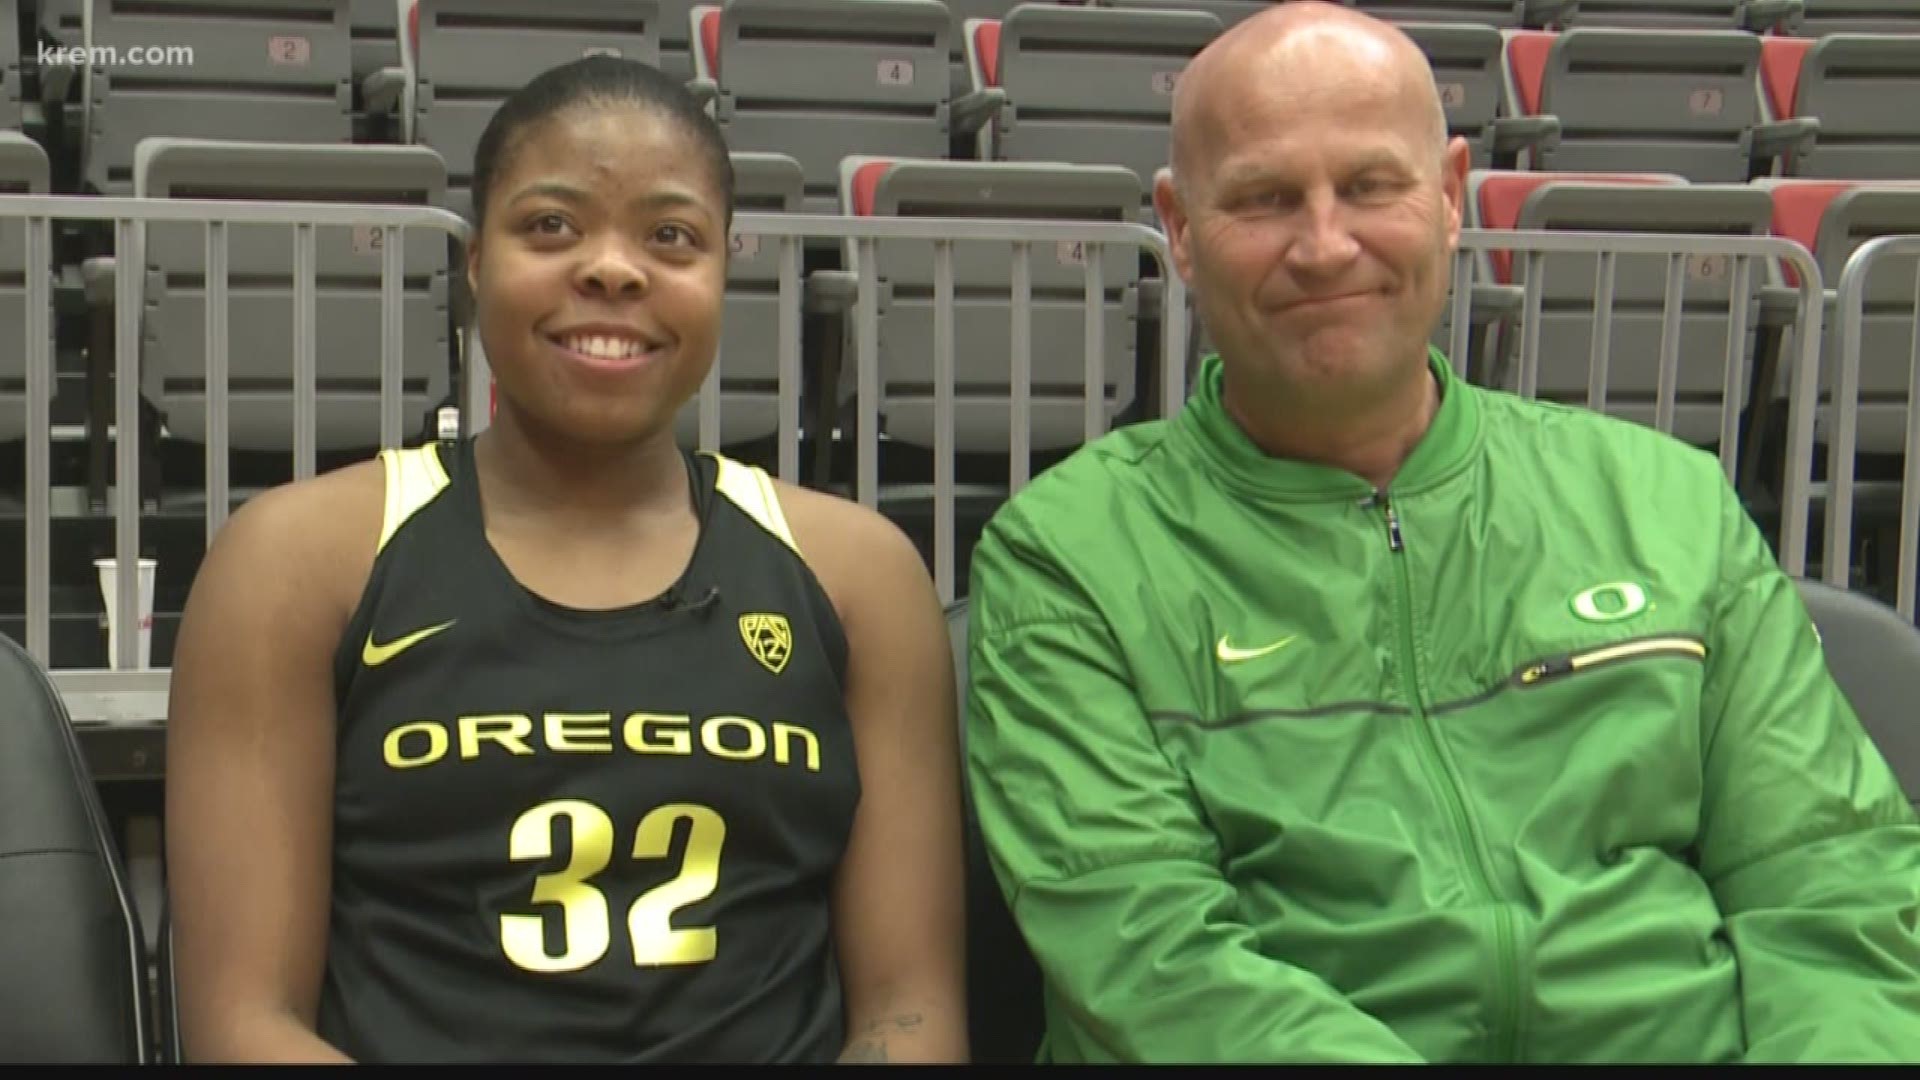 Oti Gildon committed to the Oregon Ducks before the squad became one of the best in the nation. We caught up with Gildon as her time in an Oregon uniform winds down.